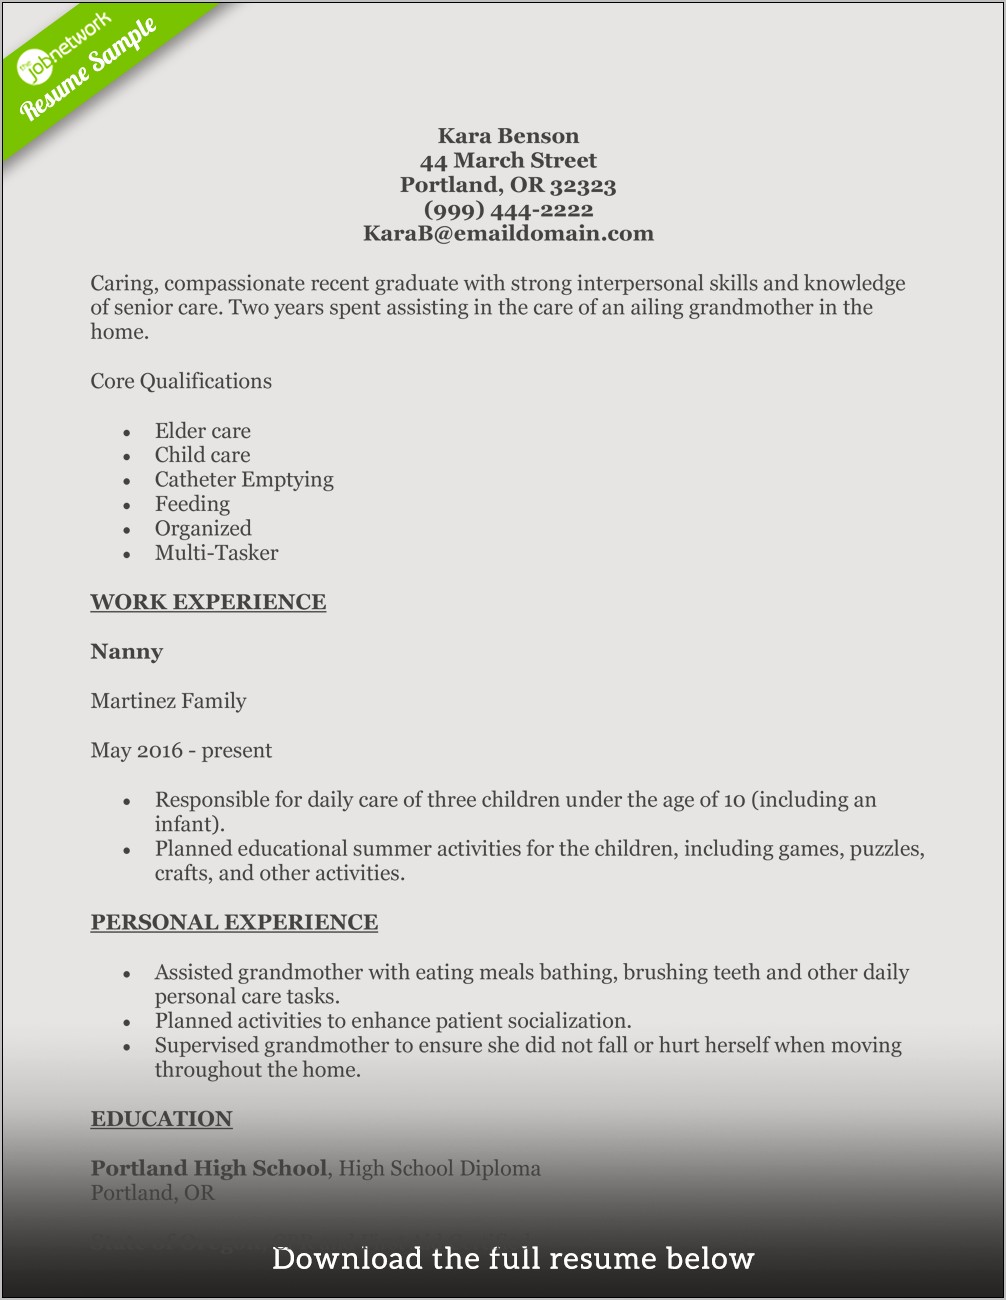 Resume Examples For Home Health Care